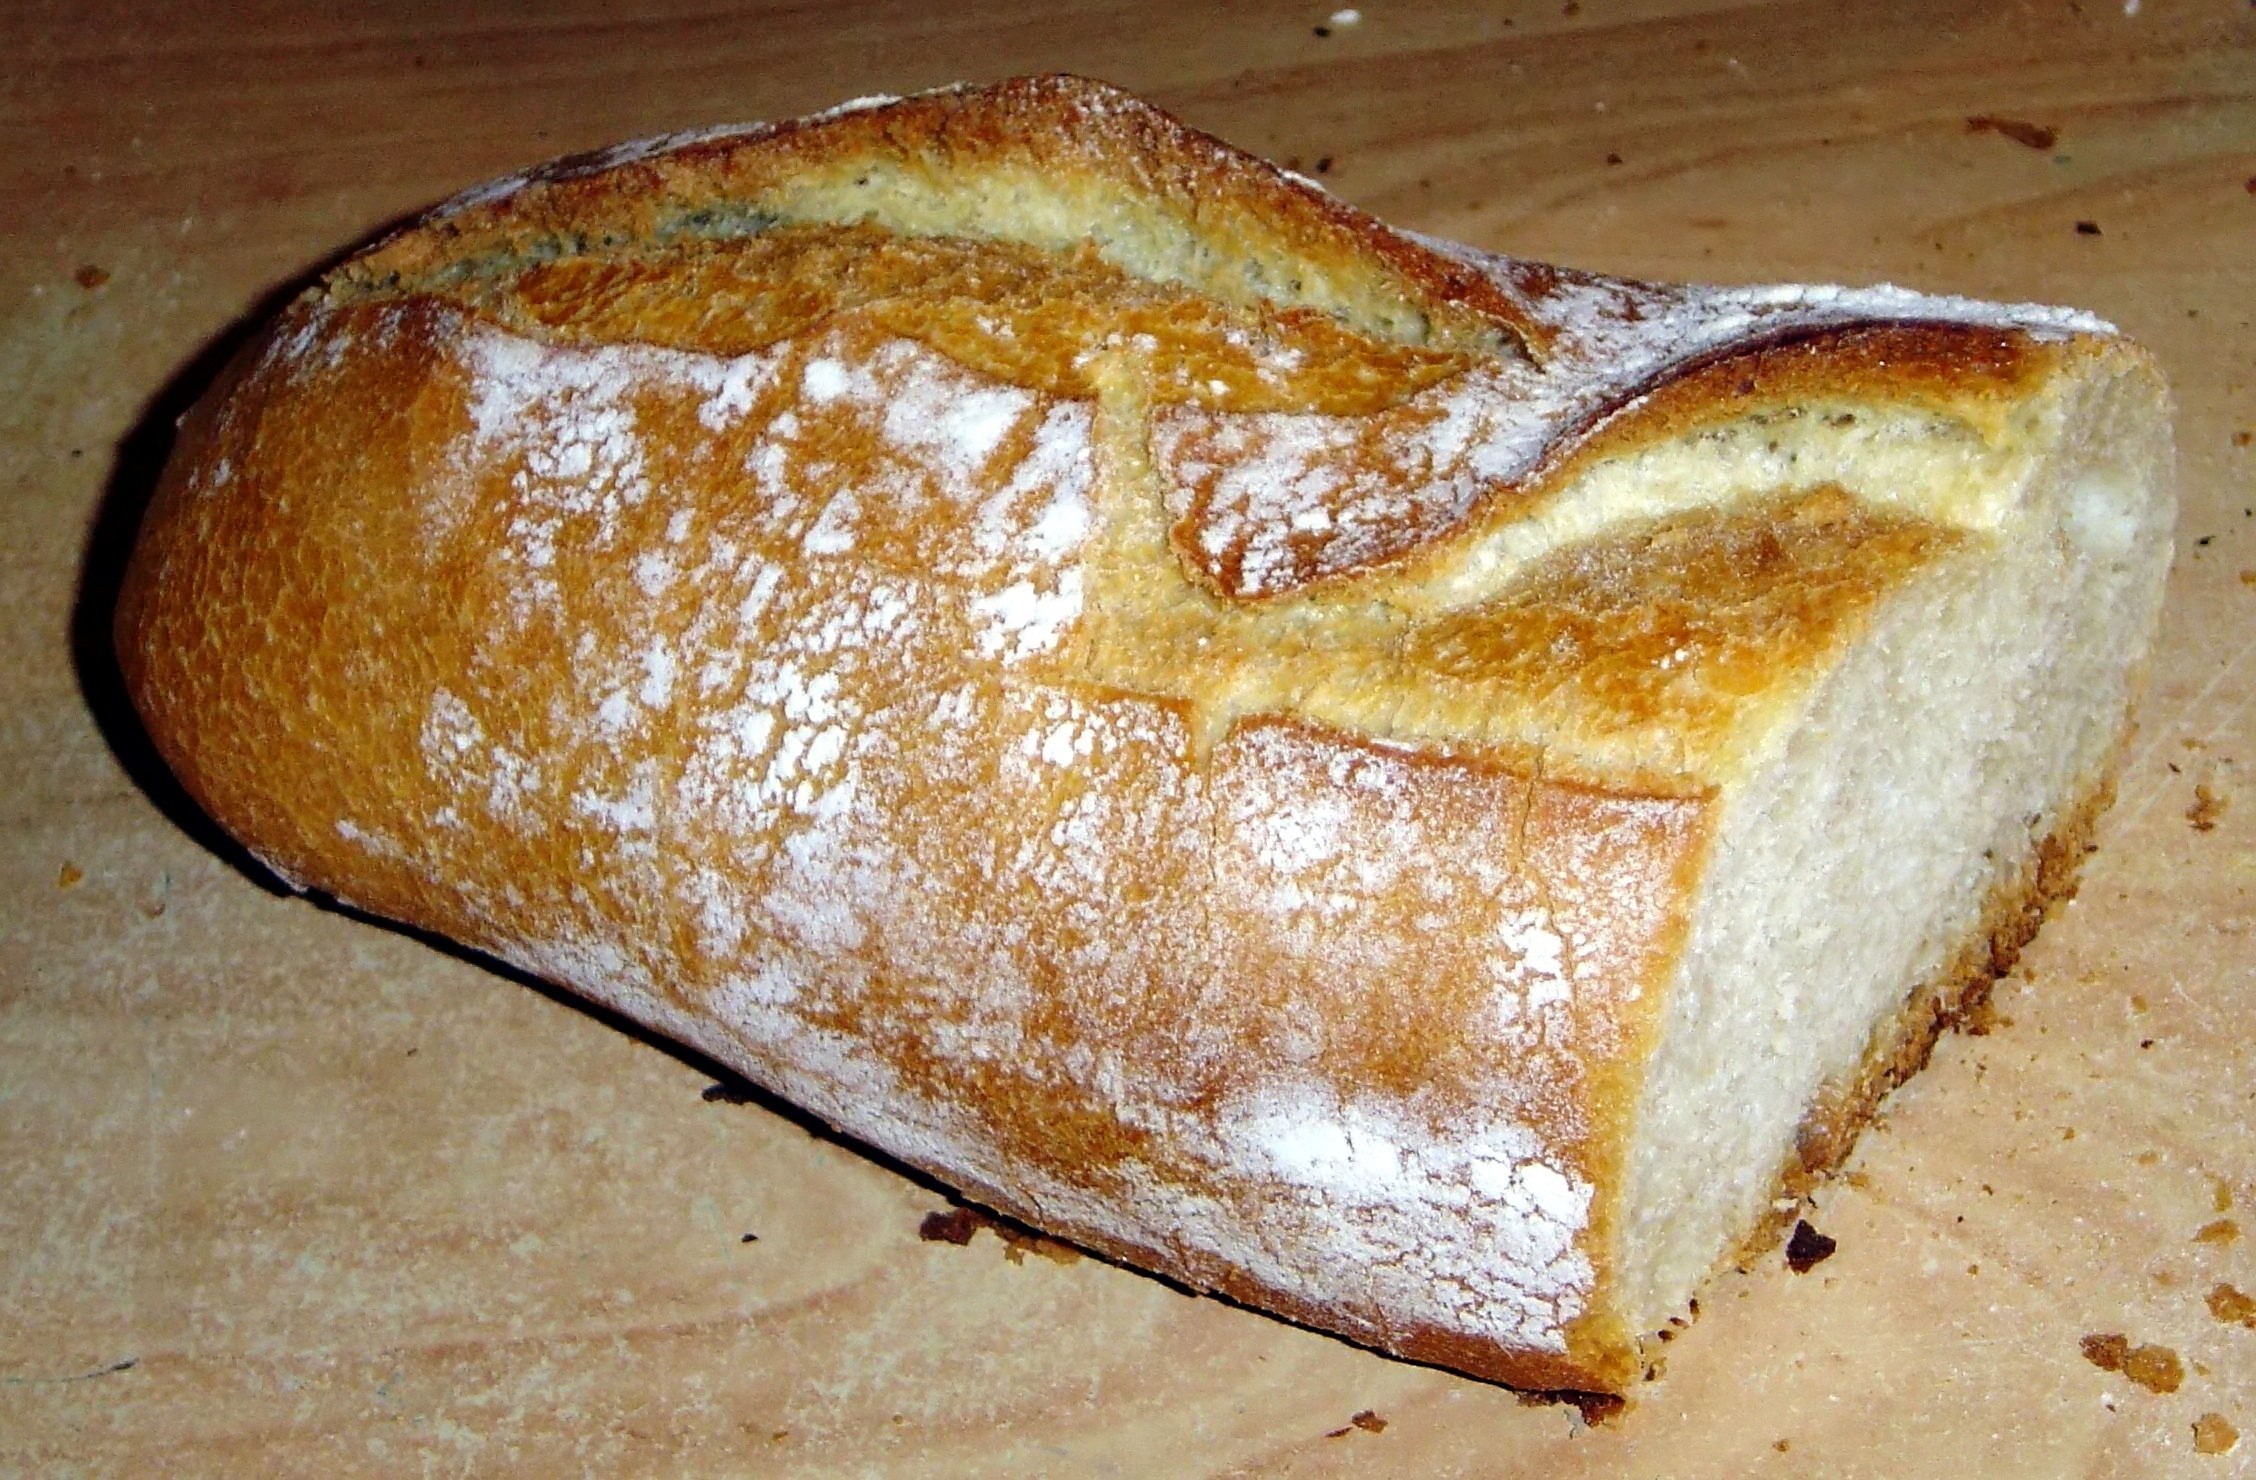 French bread That has had pieces cut off